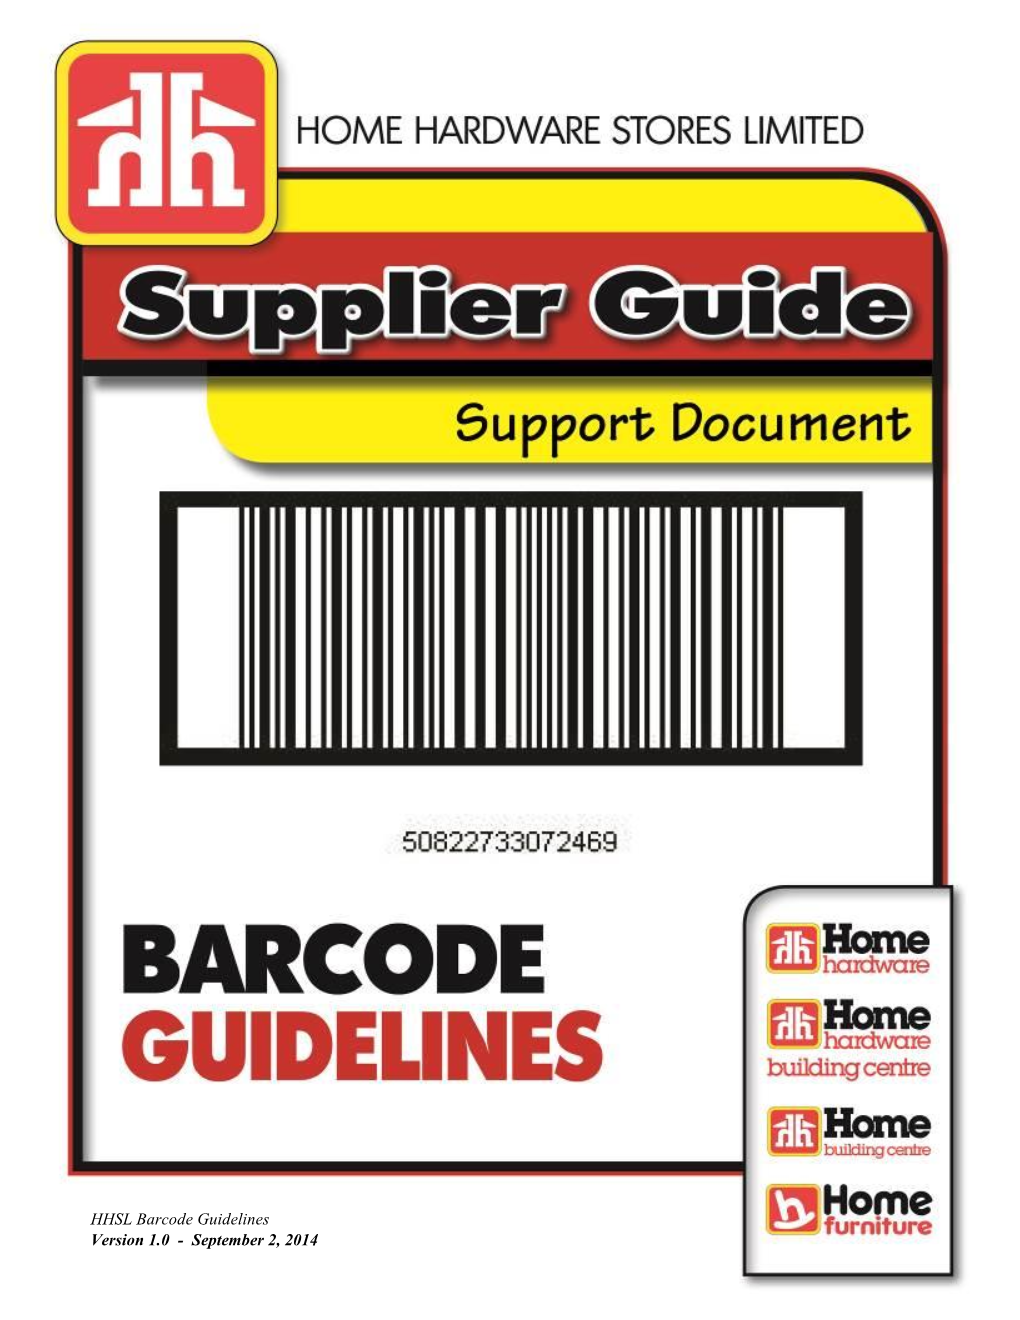 Barcode Guidelines Version 1.0 - September 2, 2014 HHSL Barcode Guidelines Version 1.0 - September 2, 2014 Page #1 of 14 Table of Contents